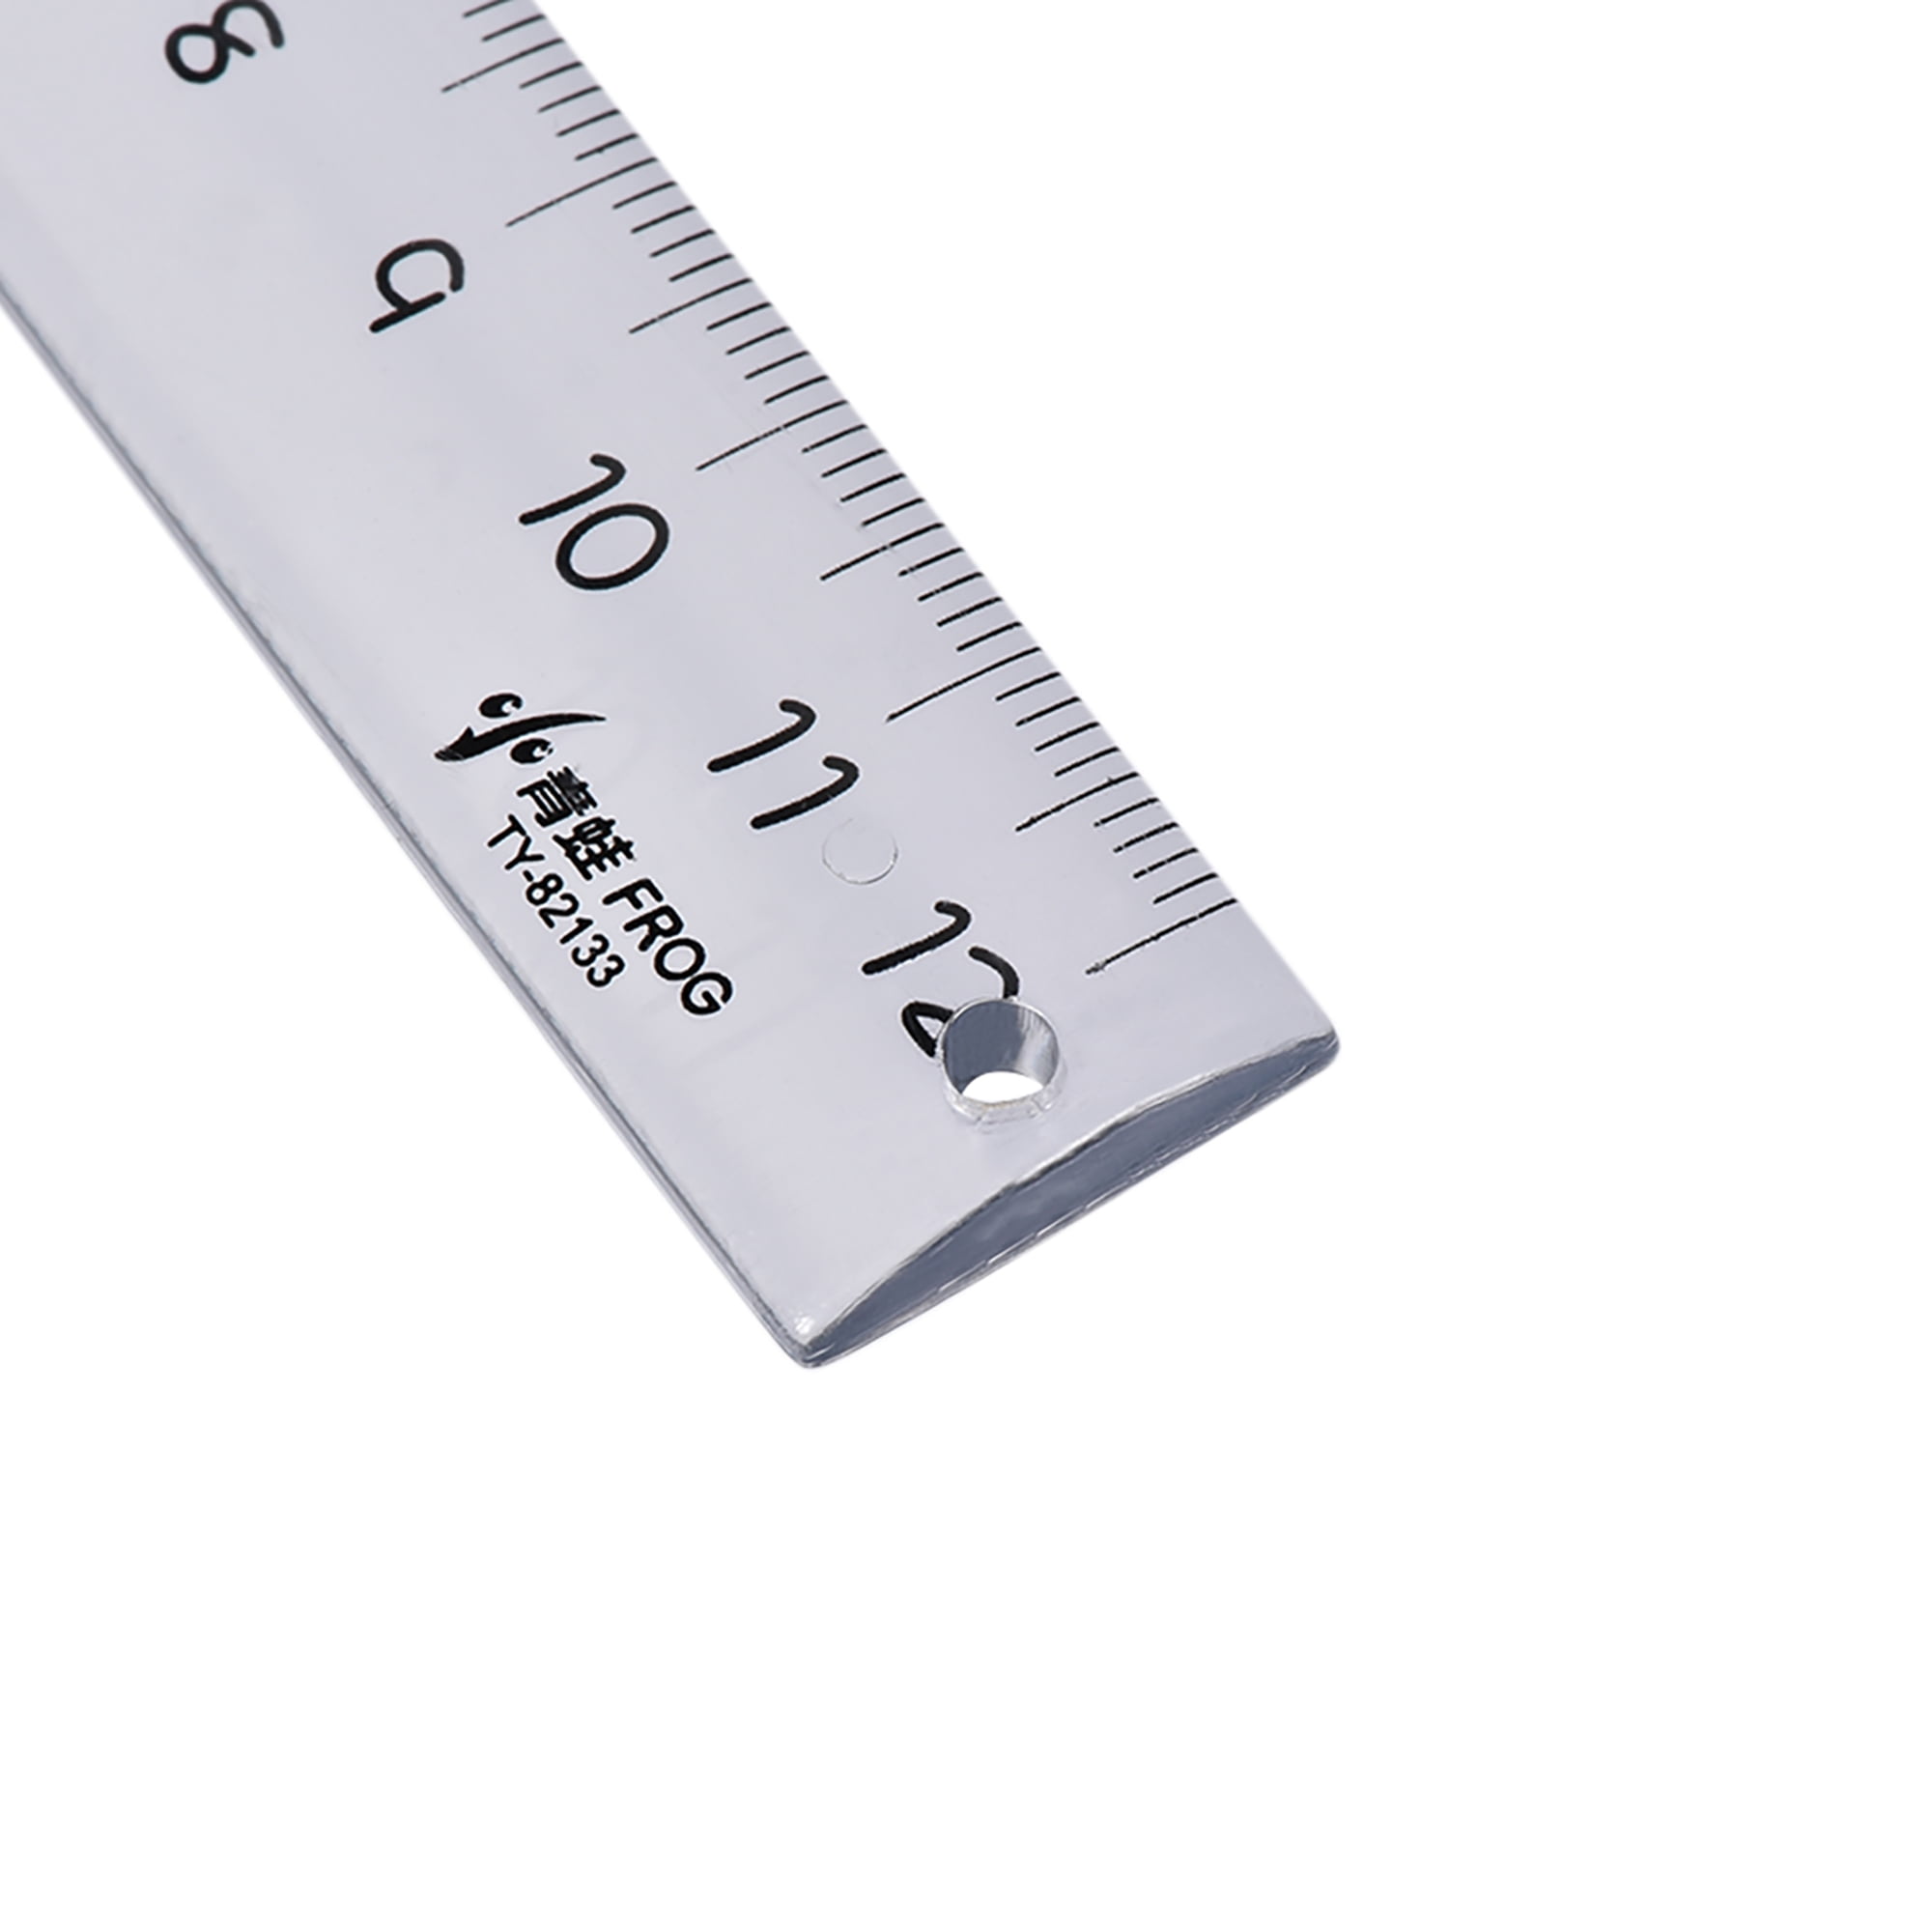 ALLINONE-1121-001 Plastic Ruler Flexible Ruler with inches and metric  Measuring Tool 12 and 6 inch (2 pieces): : Tools & Home  Improvement